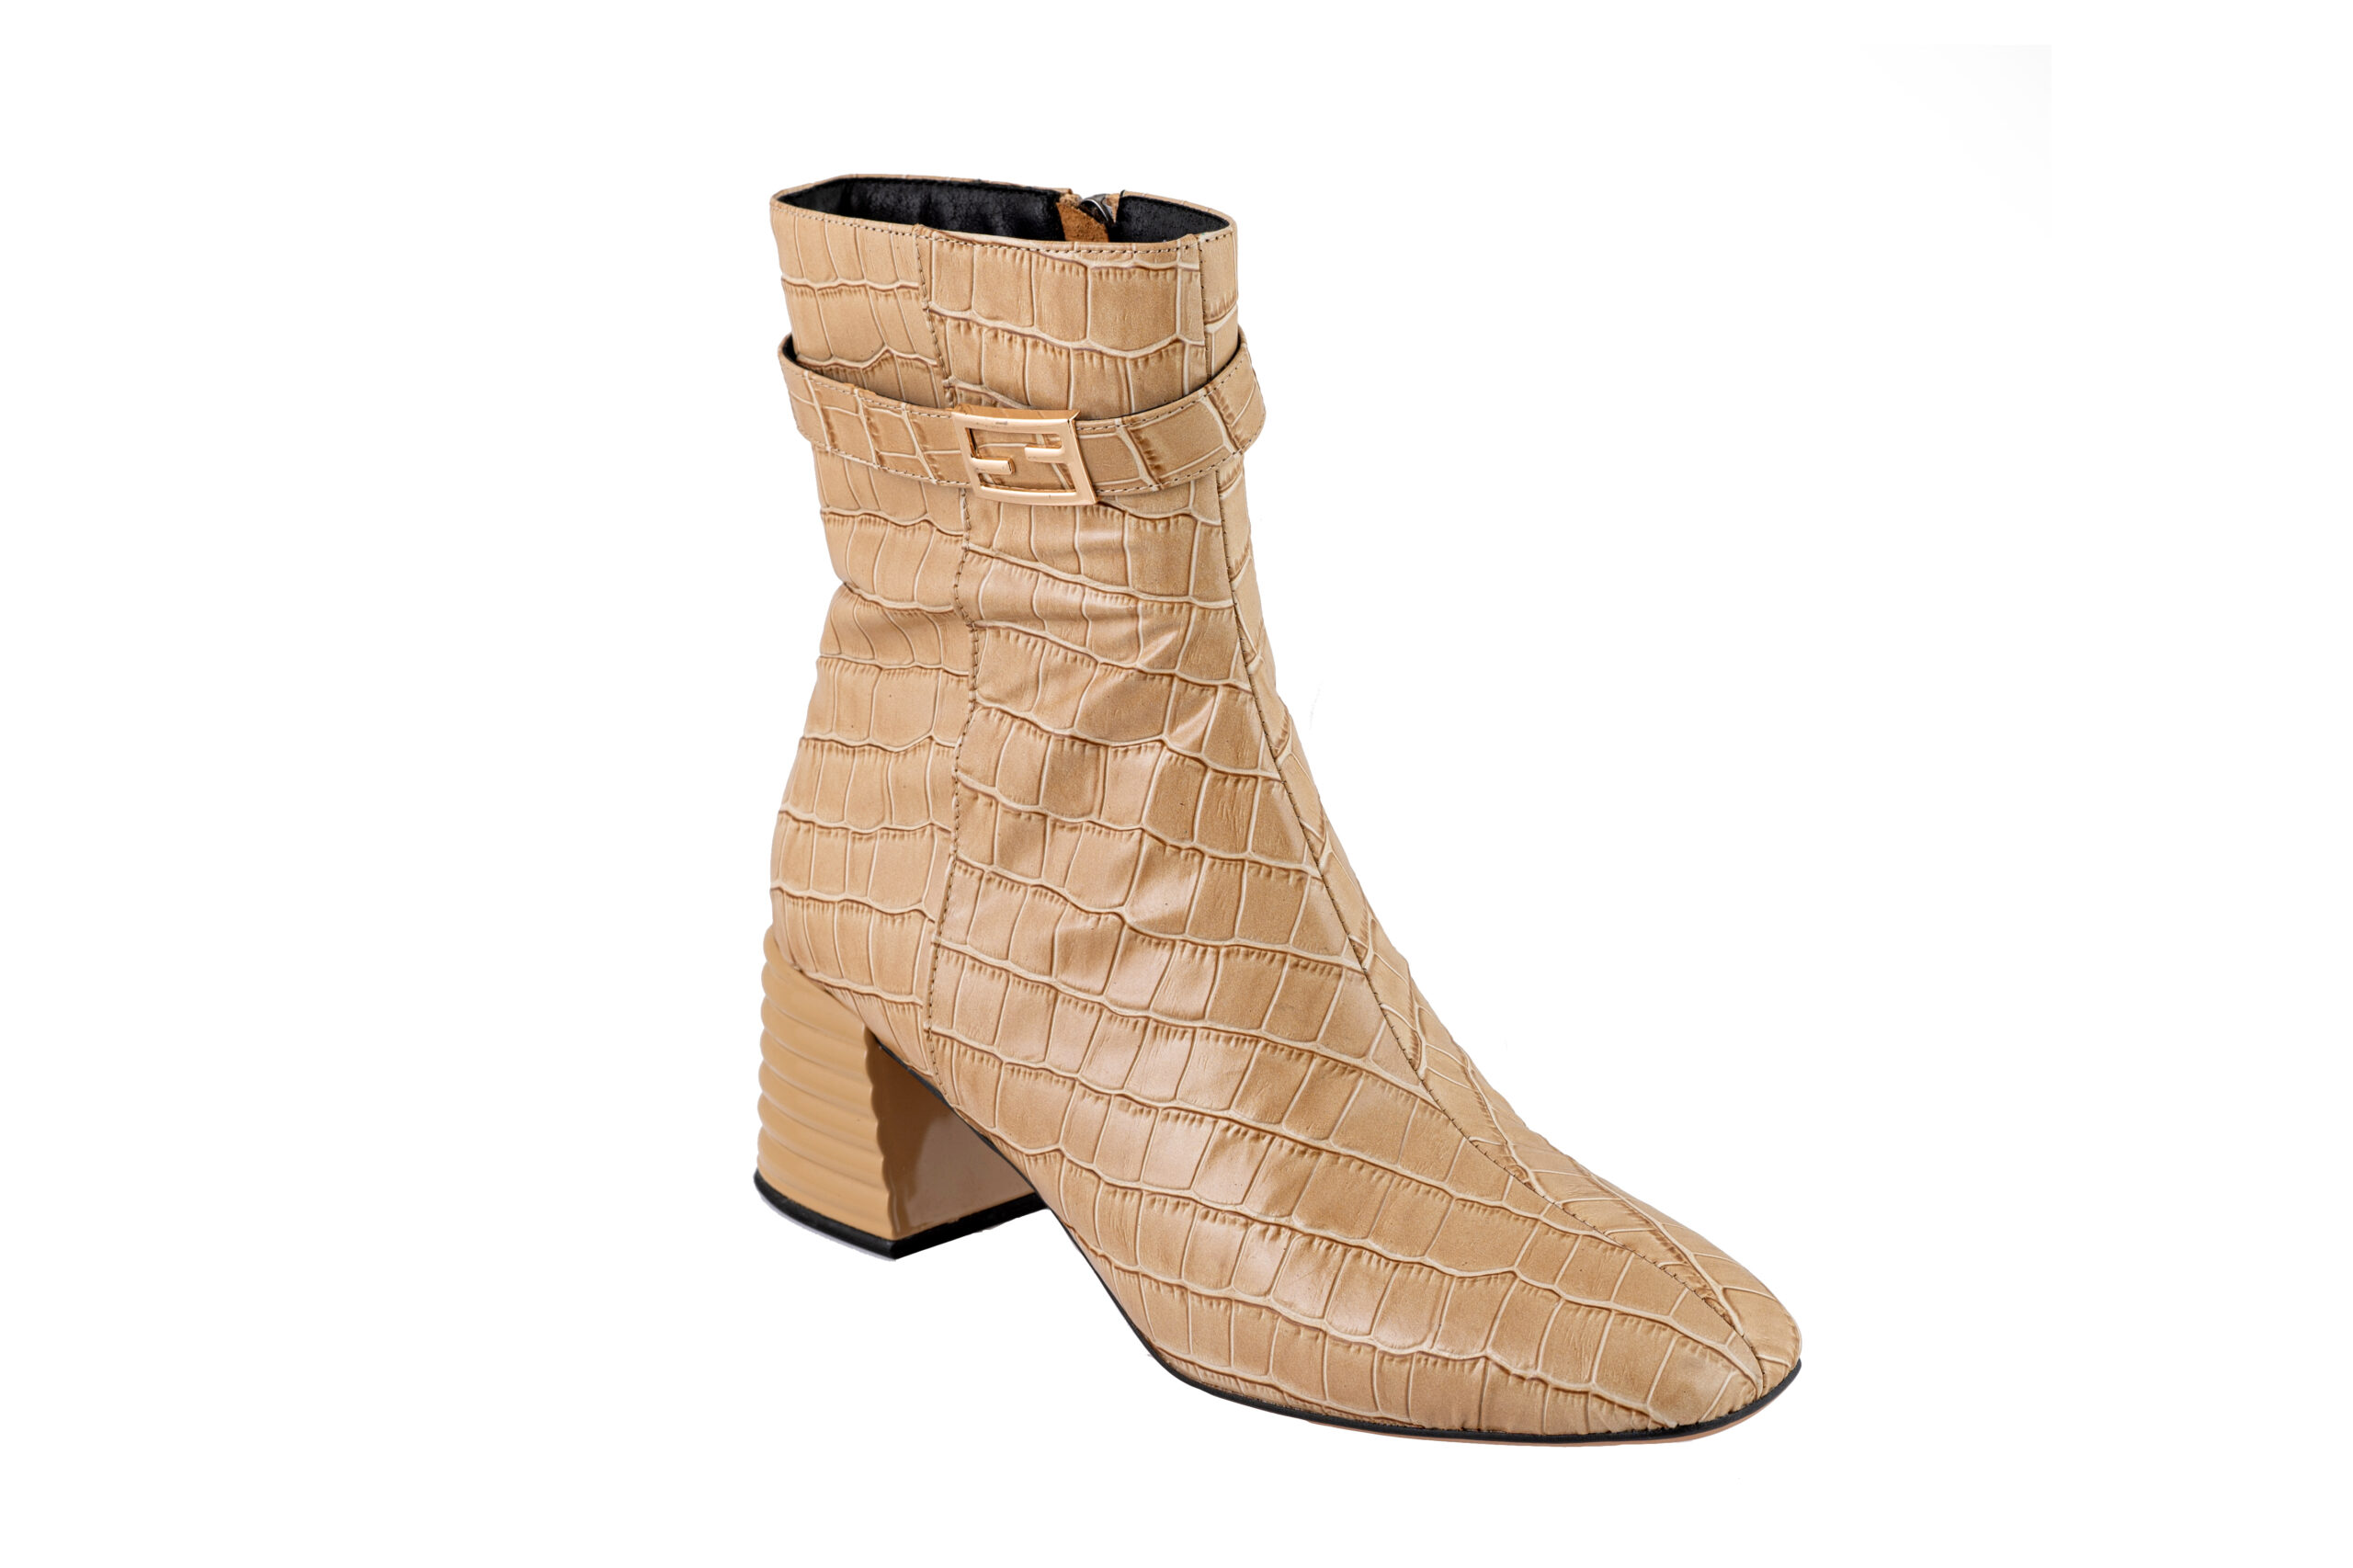 JEFFREY CAMPBELL FAVELA WOMEN’S LEATHER CROCO BOOTS